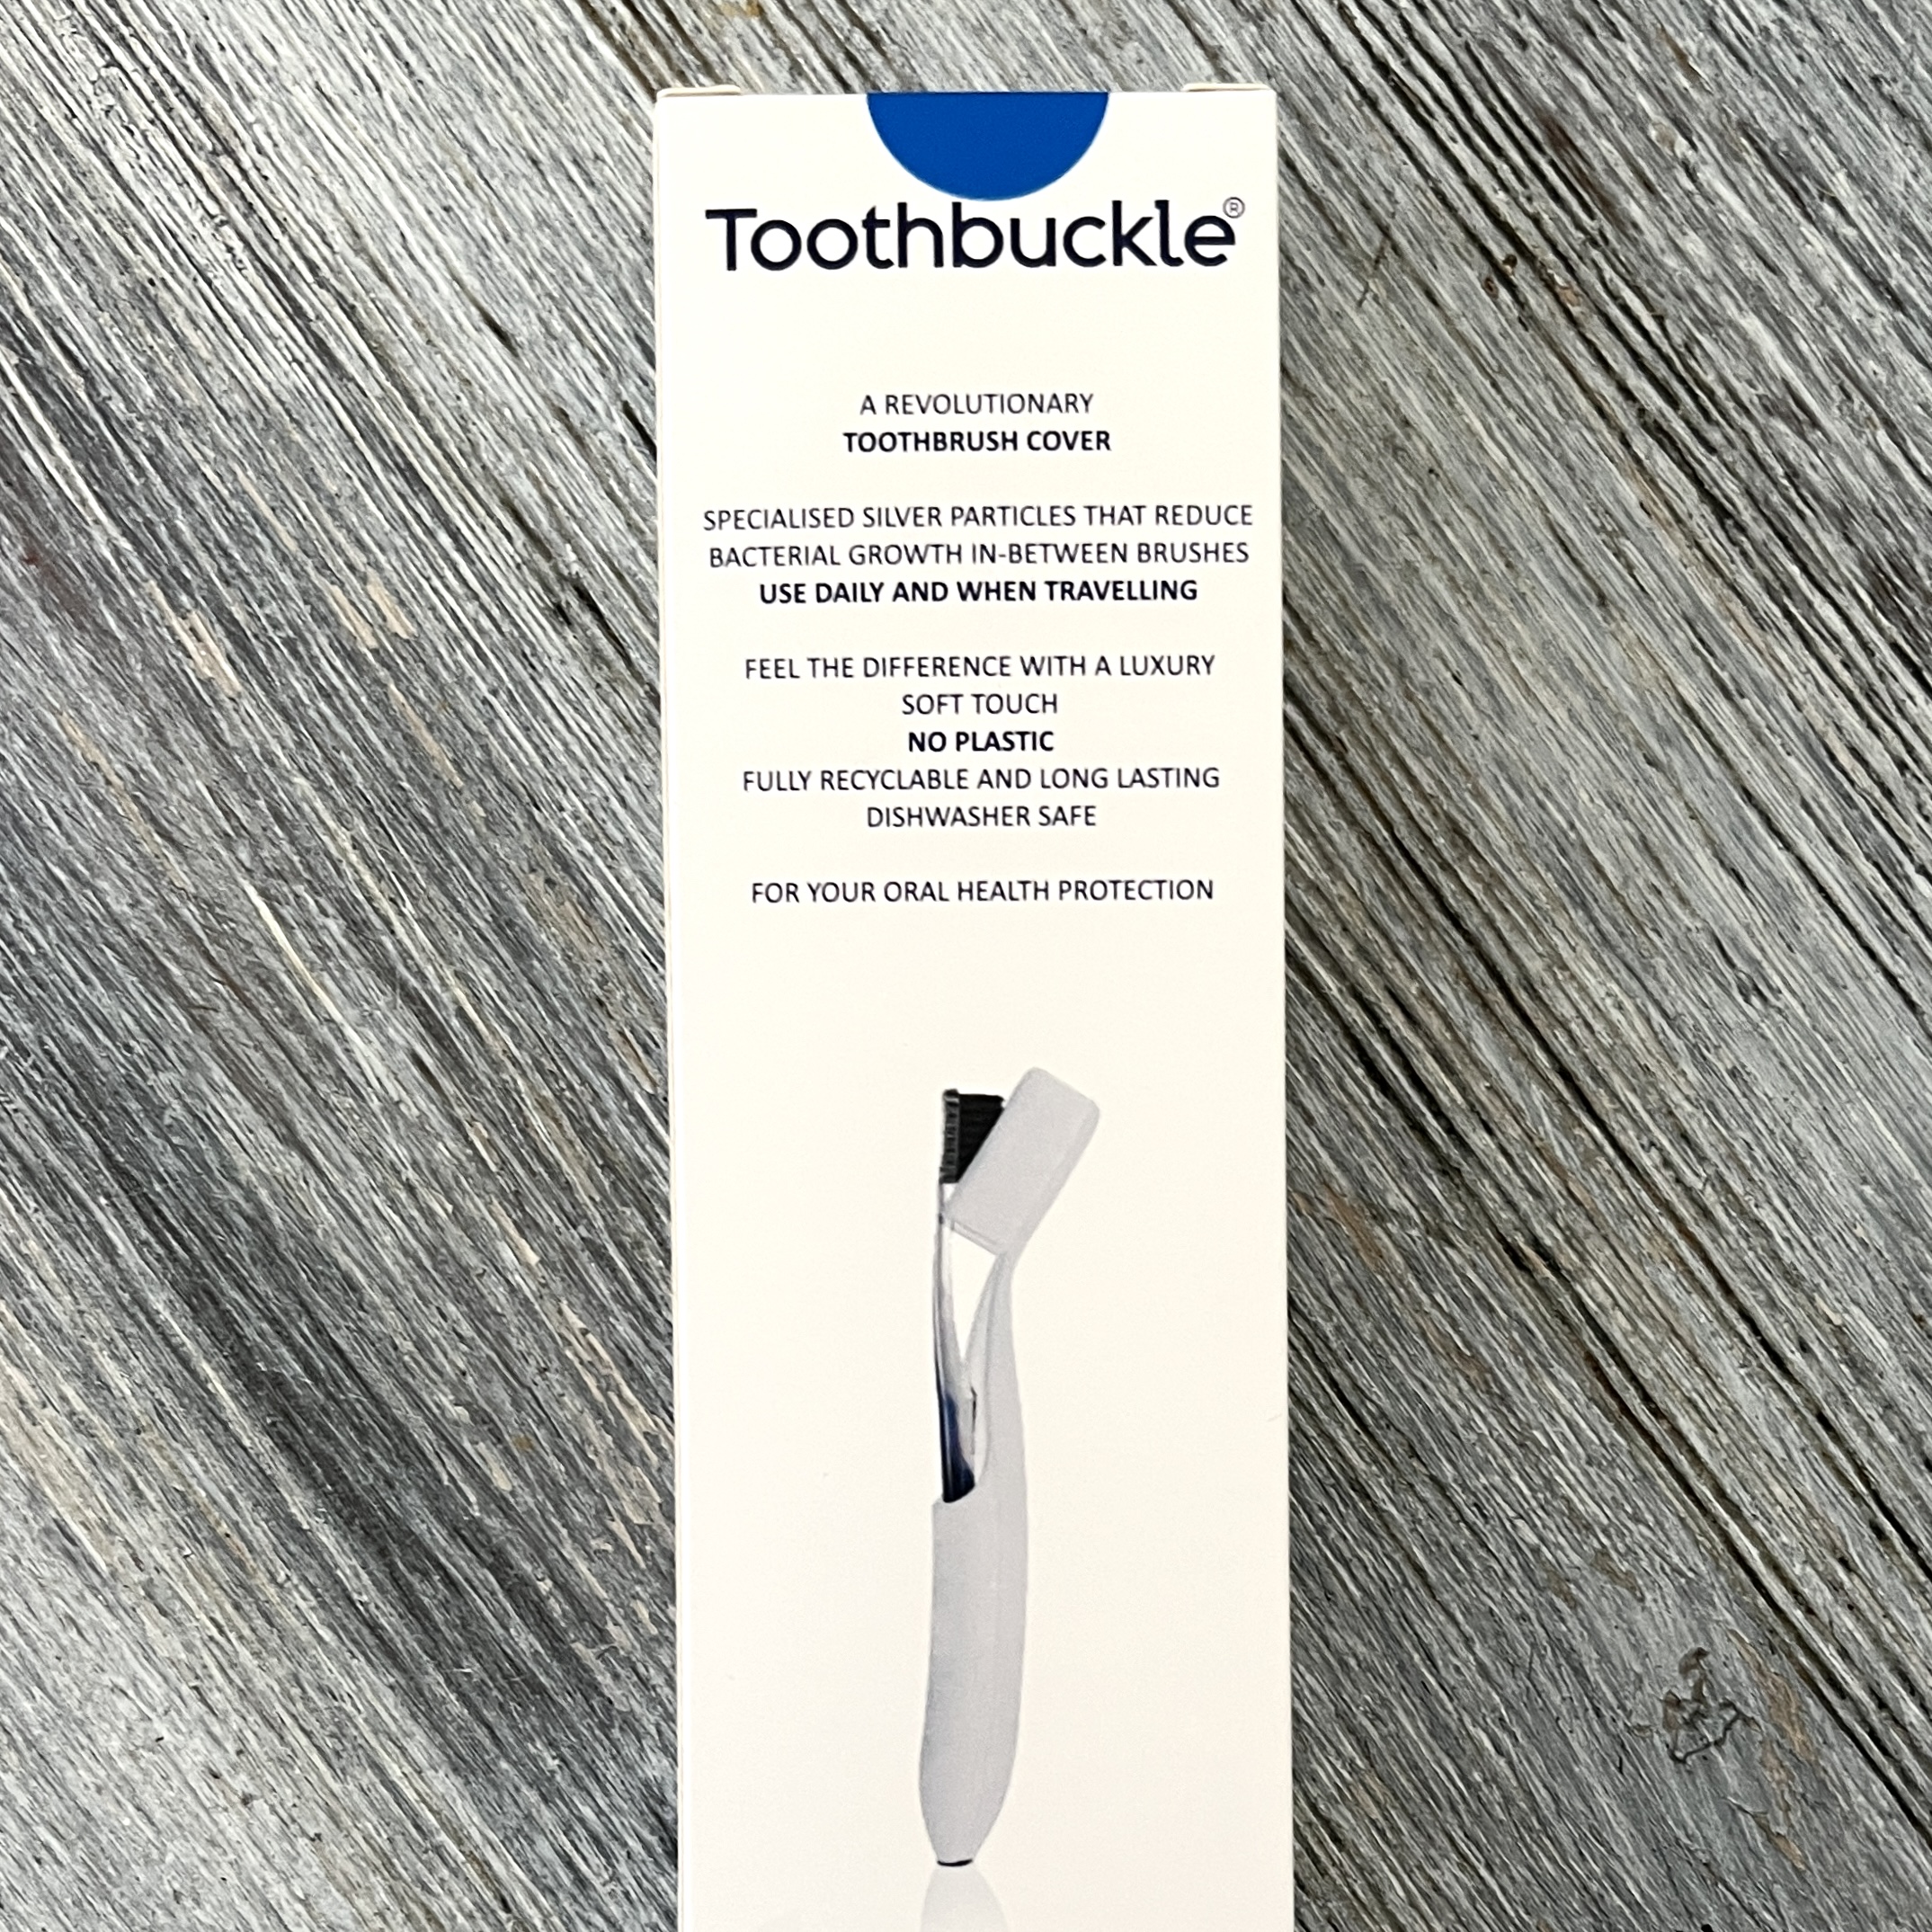 Box for Toothbuckle Toothbrush Kit for Bombay and Cedar Lifestyle Box January 2022